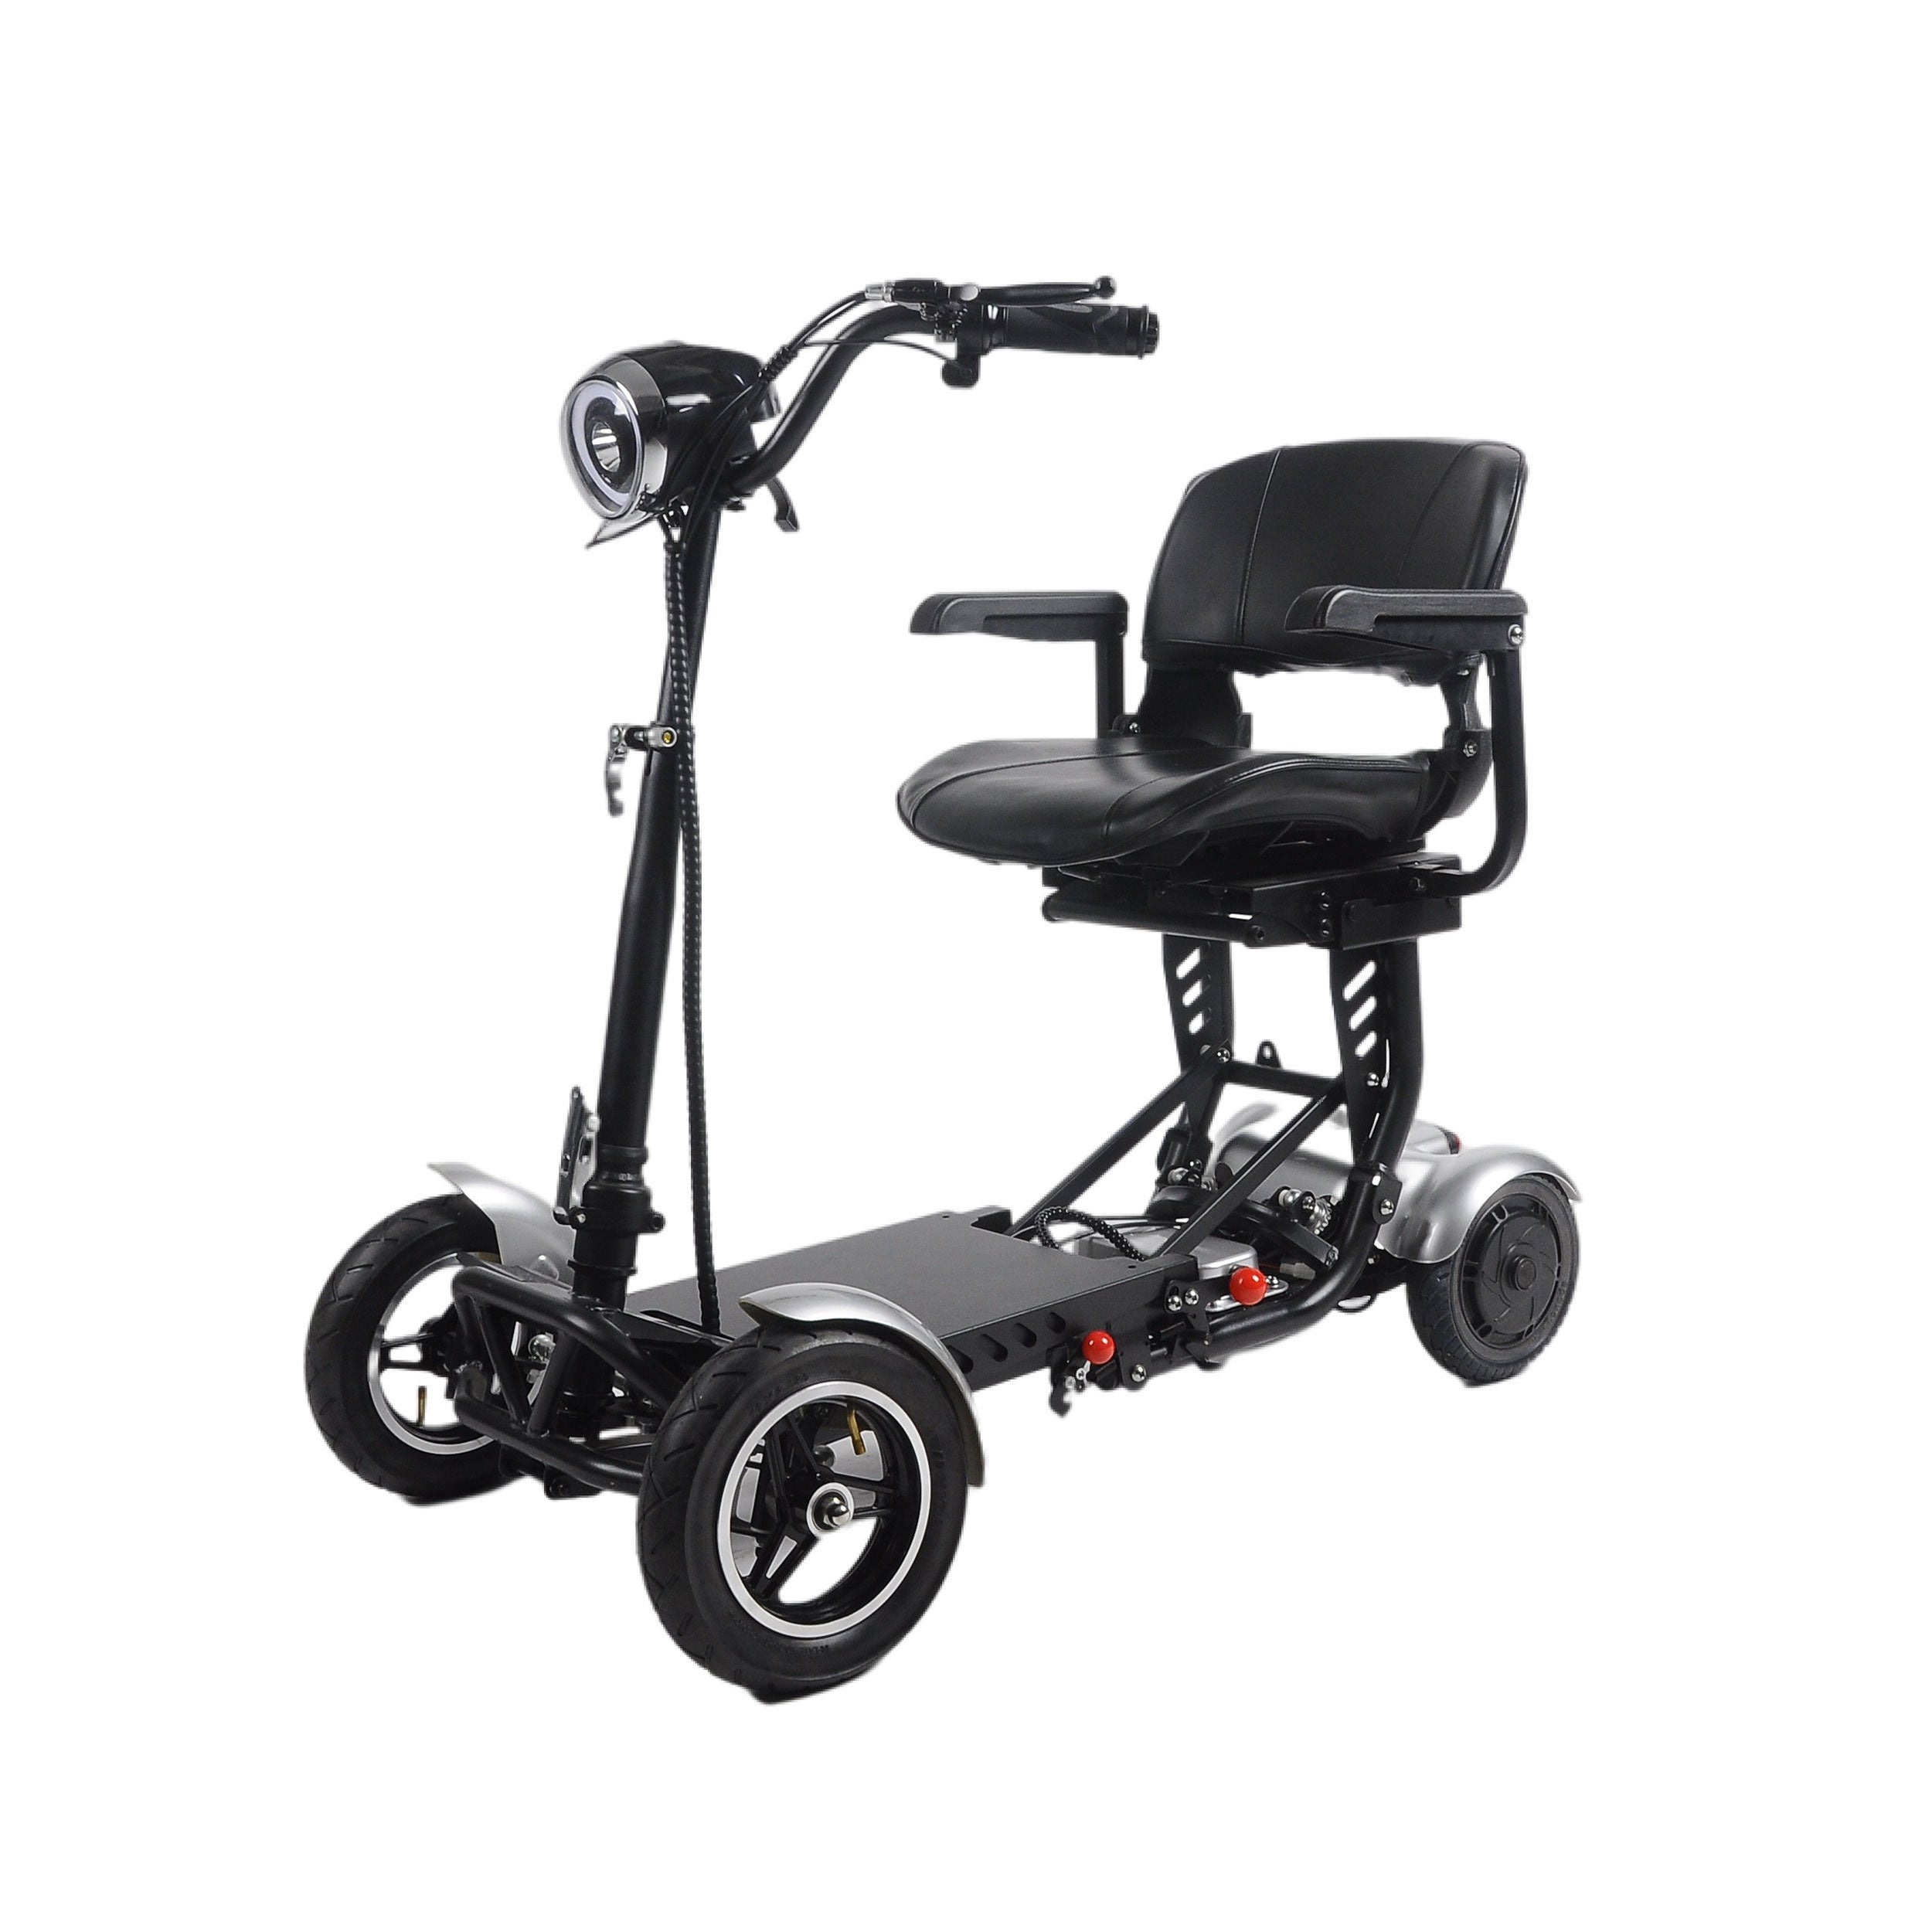 Rubicon FX All terrain mobility scooter